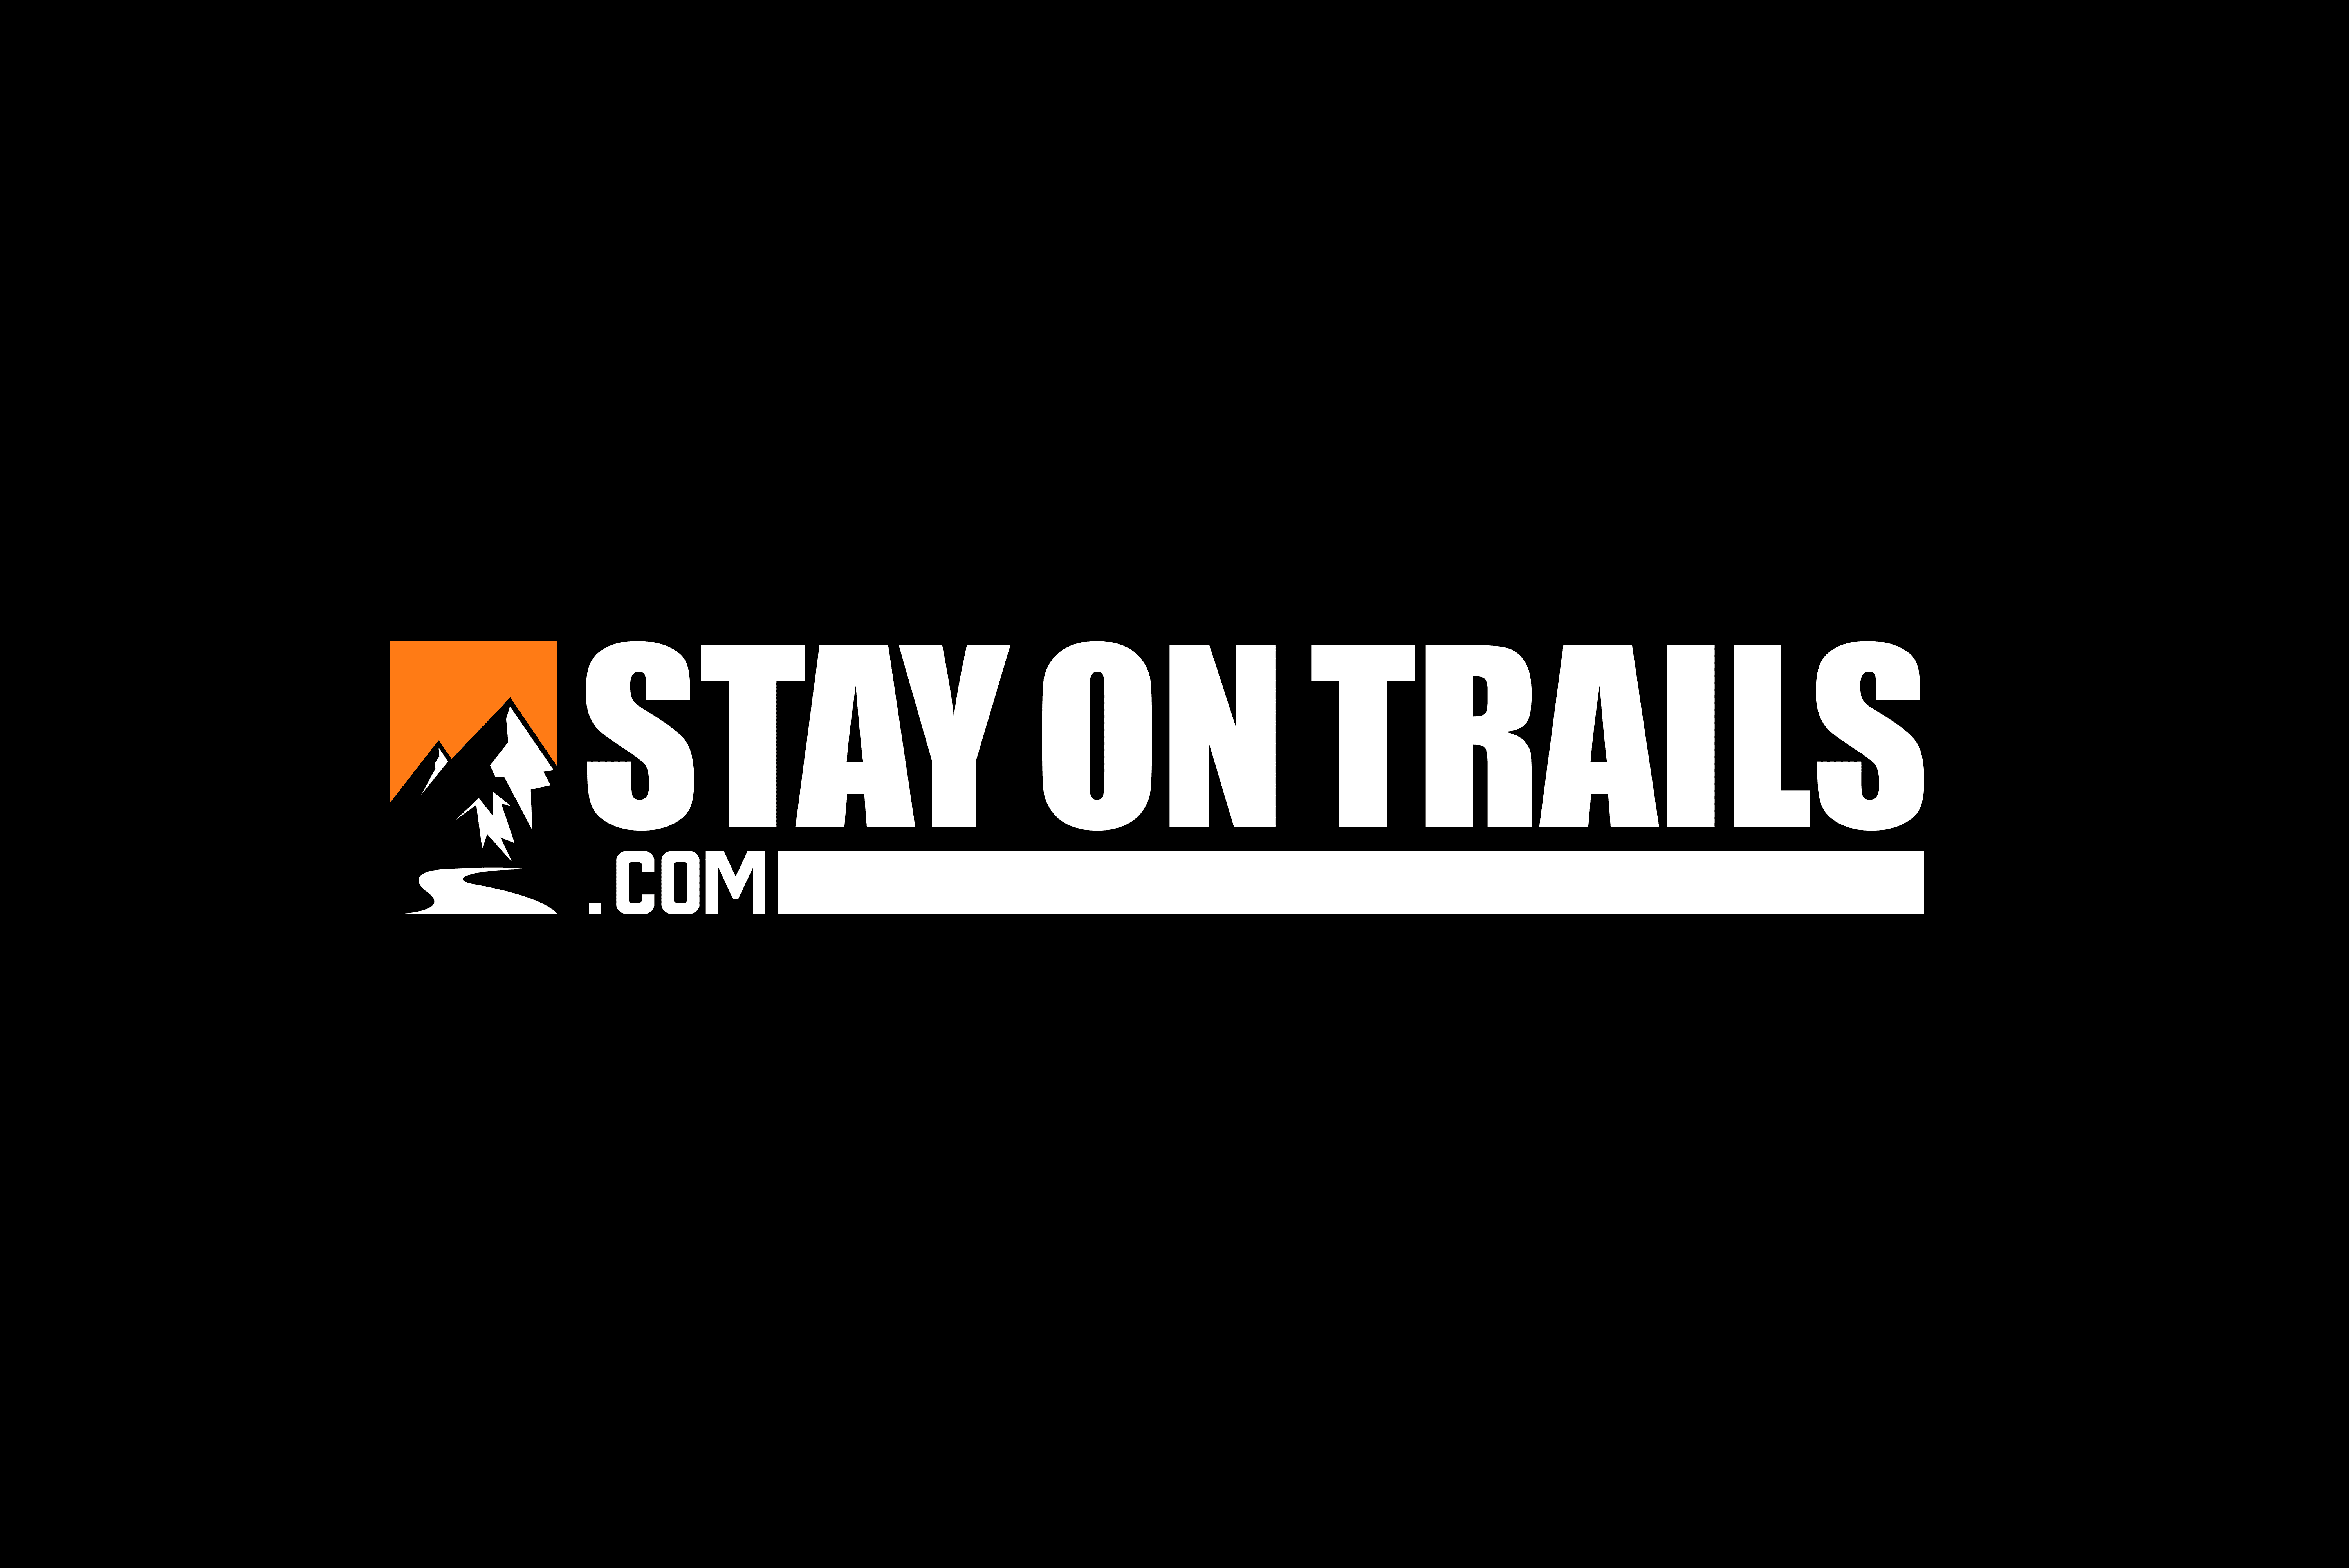 STAY ON TRAILS